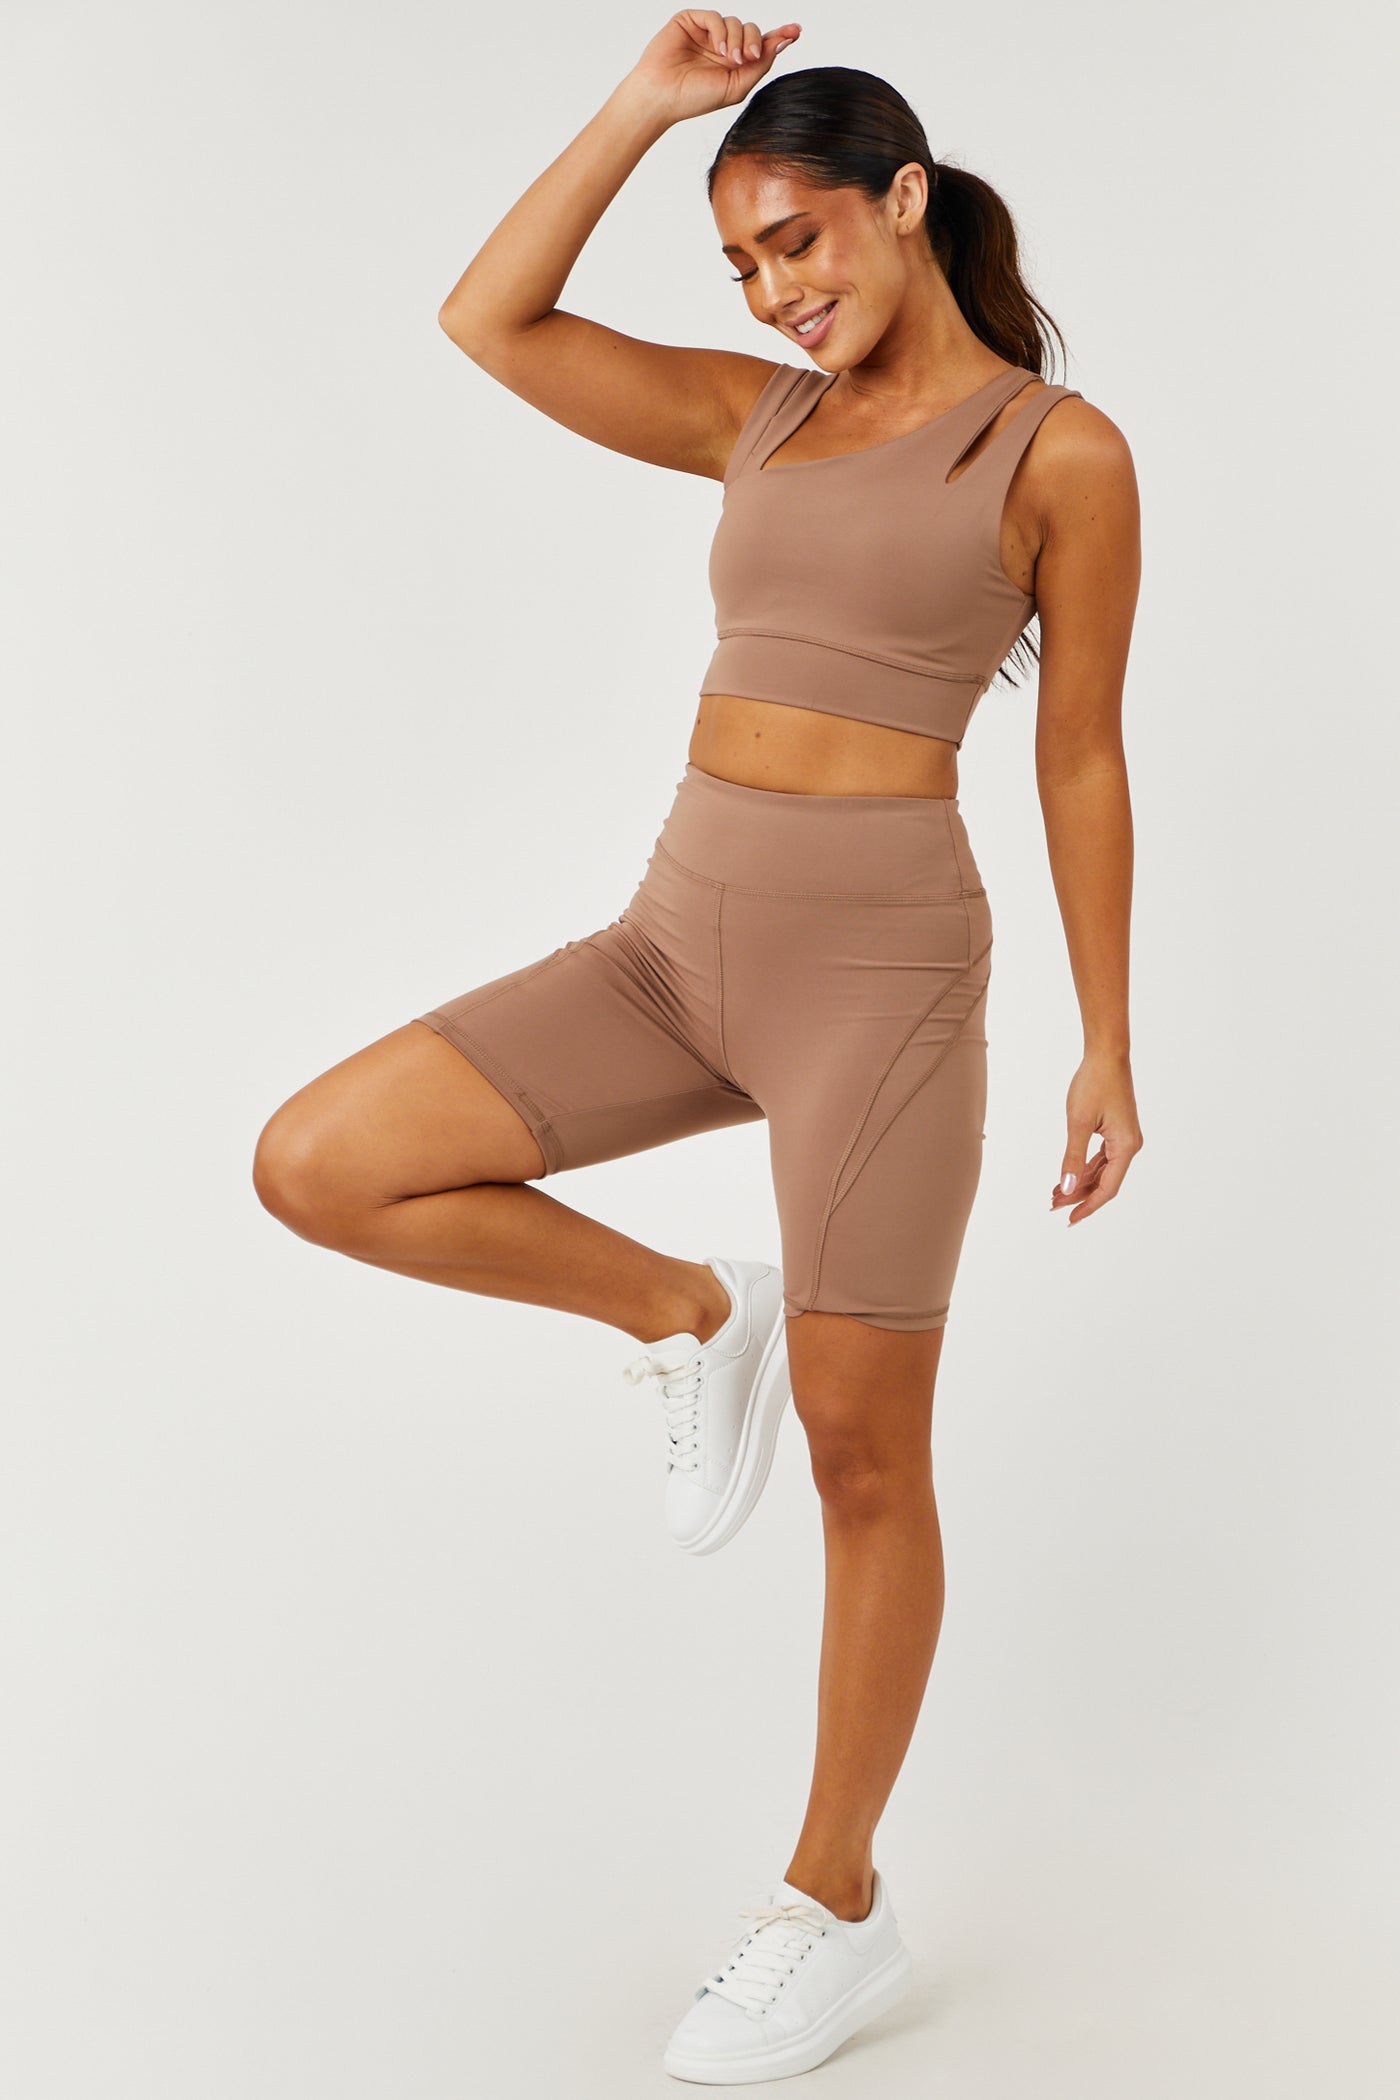 Olive Asymmetrical Crop Top and Shorts Set